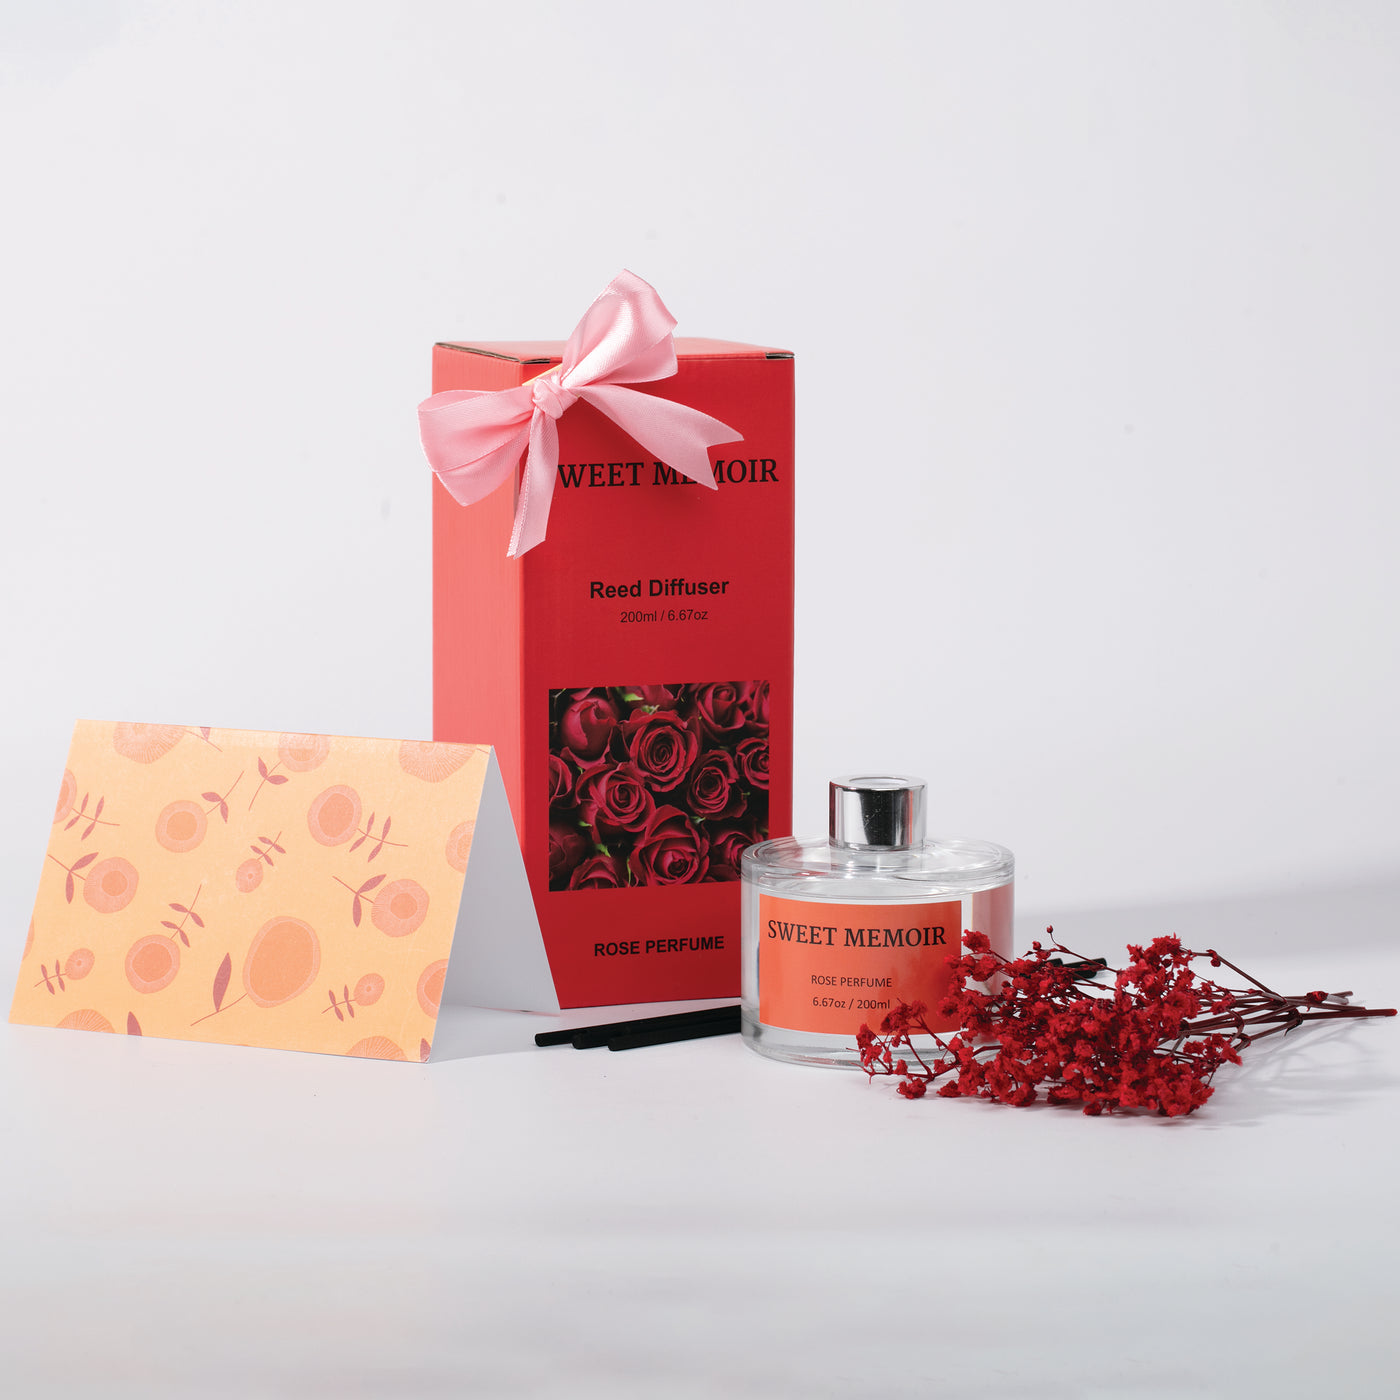 Sweet Memoir reed diffuser gift sets with vibrant packaging, ready for gifting on special occasions.